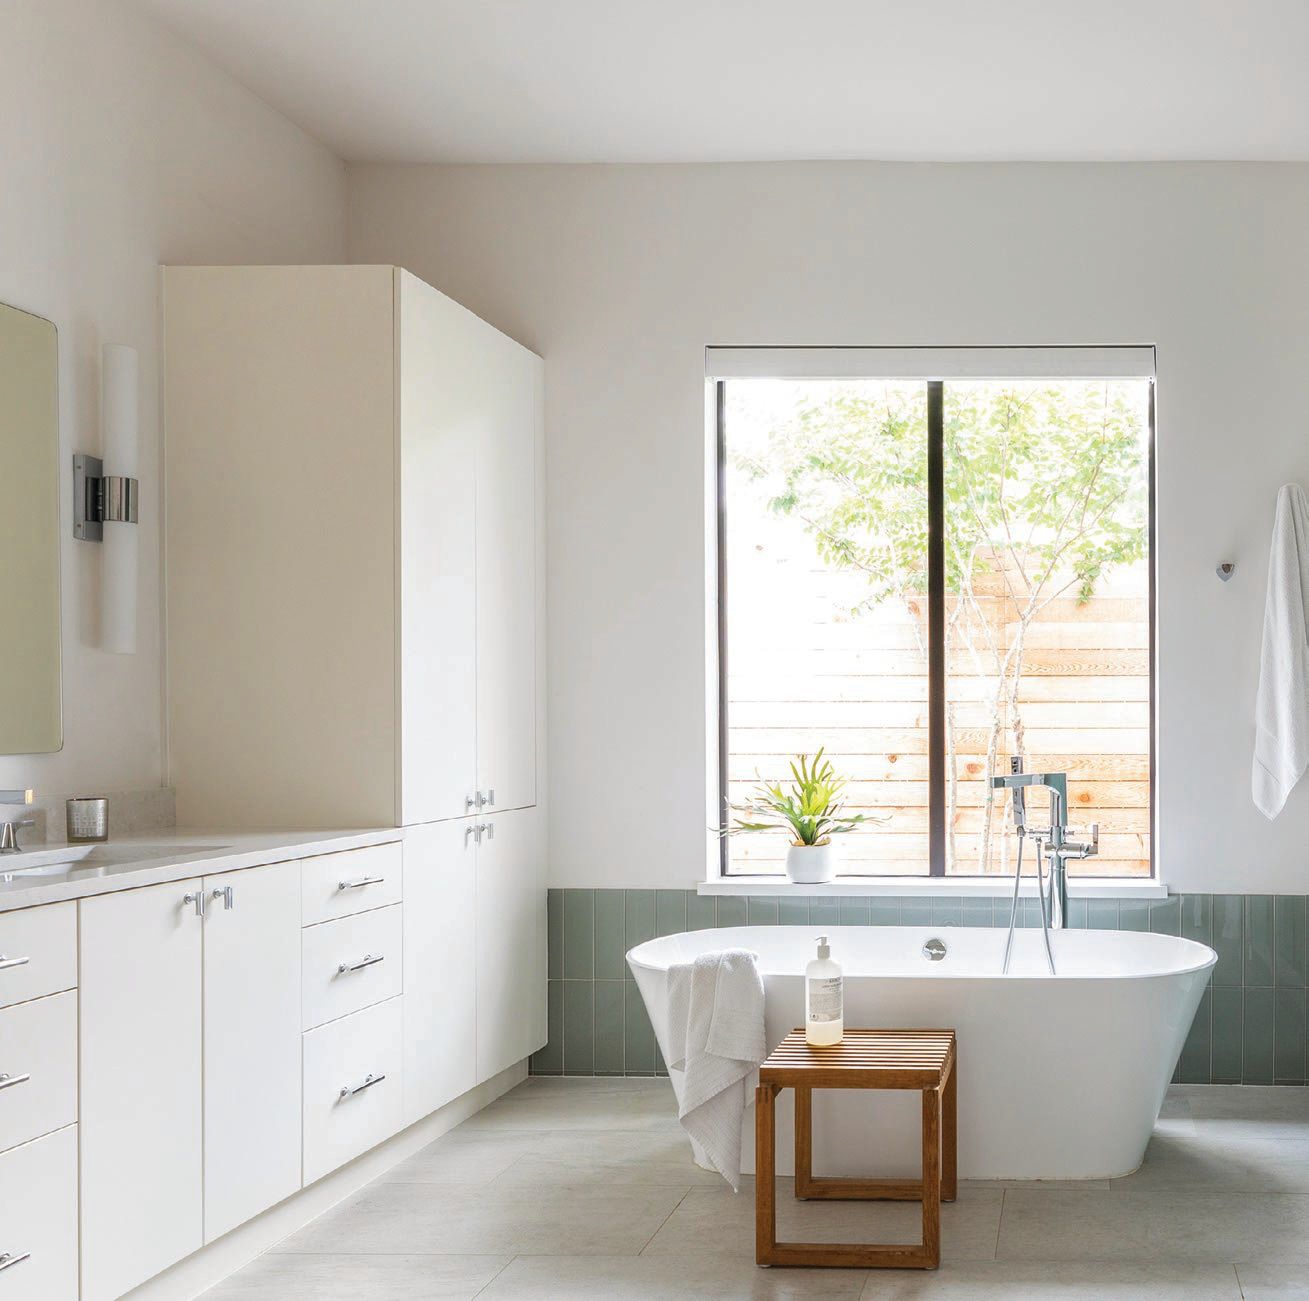 The primary bathroom features a refreshing stand-alone soaking tub and plenty of storage space. PHOTOGRAPHED BY JULIE SOEFER